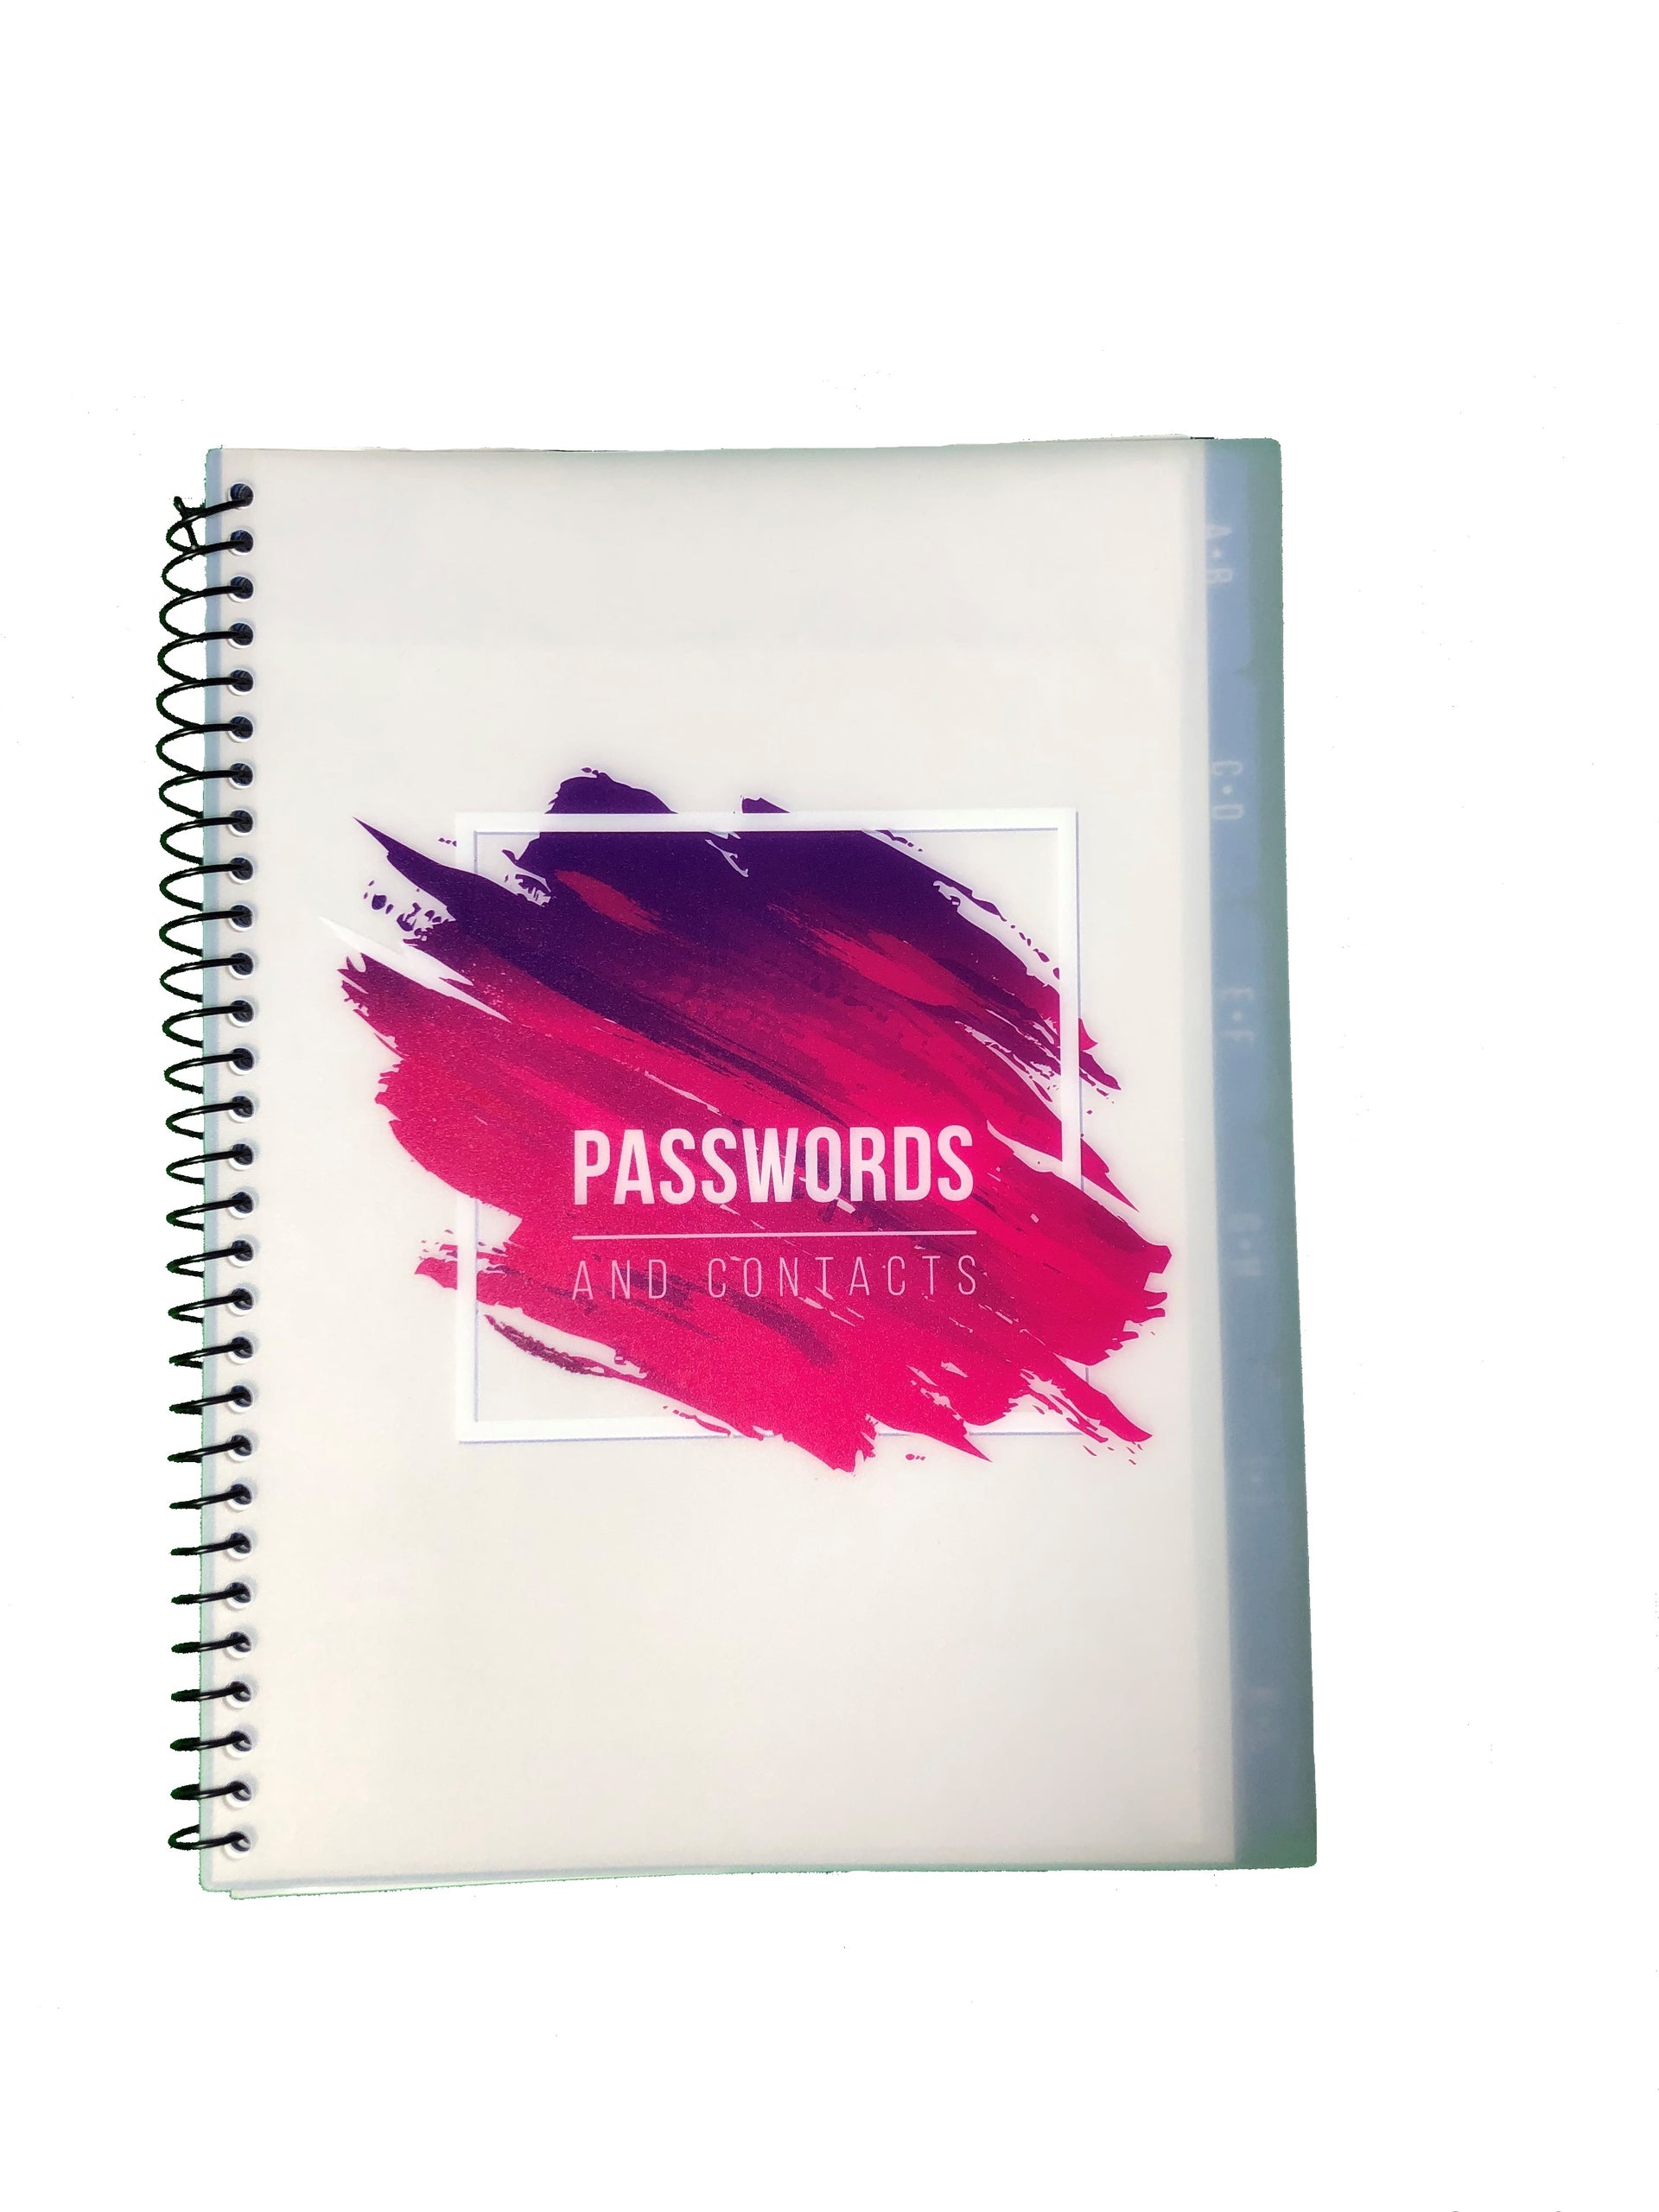 Large Password Books - The best Password Keeper Books with a 4.9 rating out of 4500